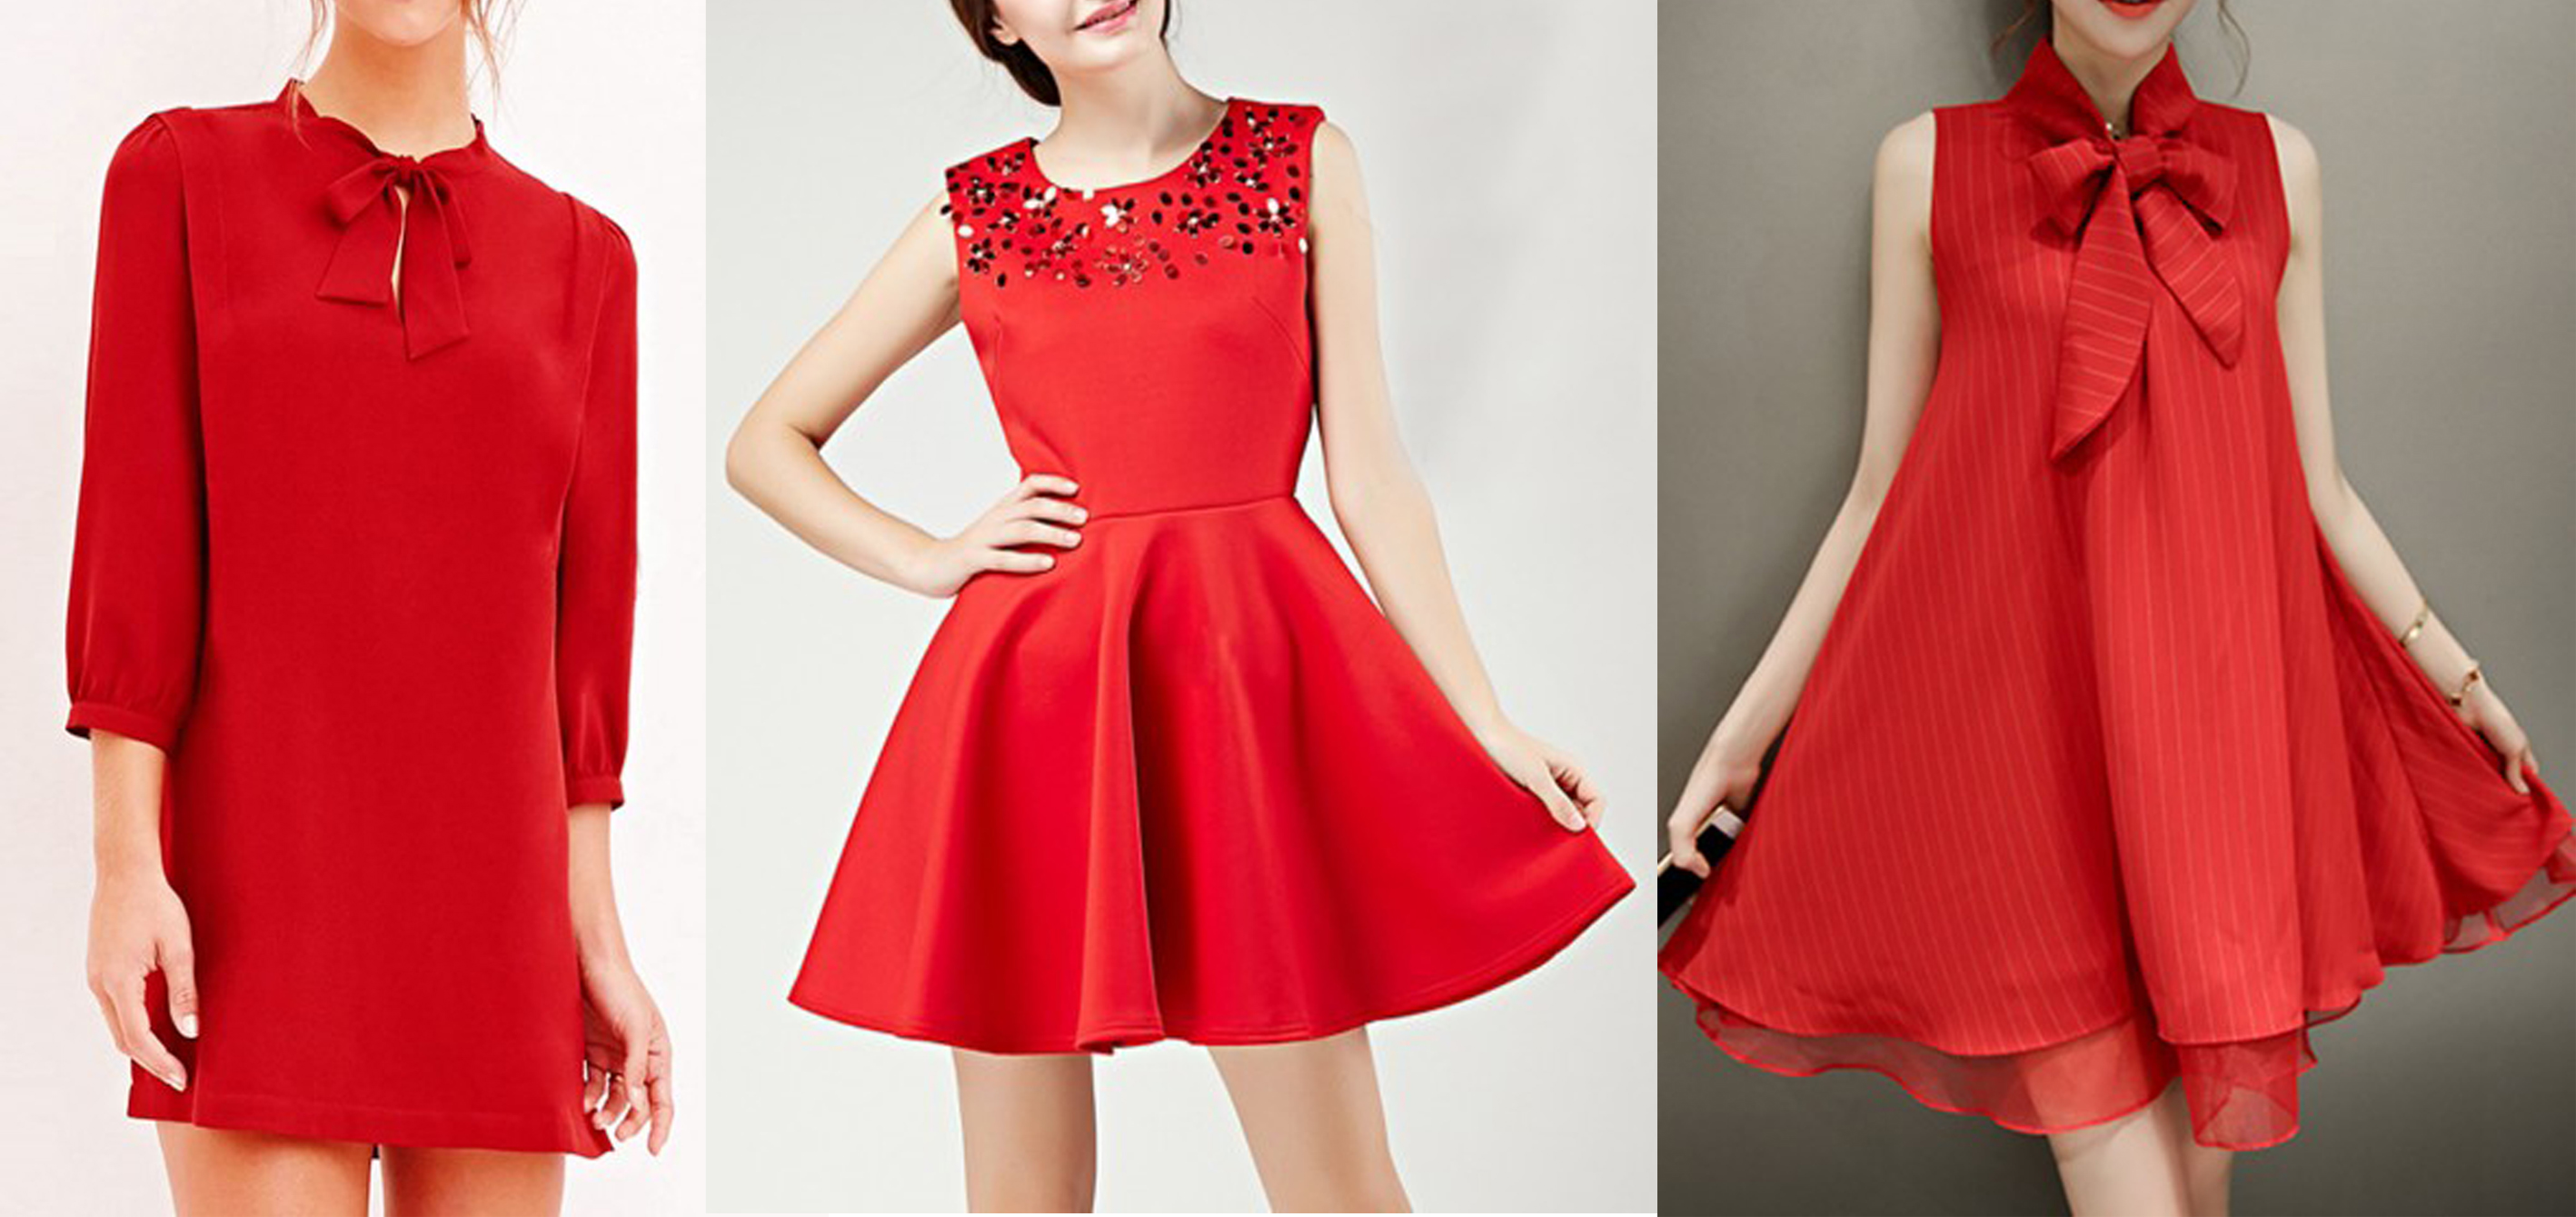 Red Dress For Christmas - Cocktail Dresses 2016